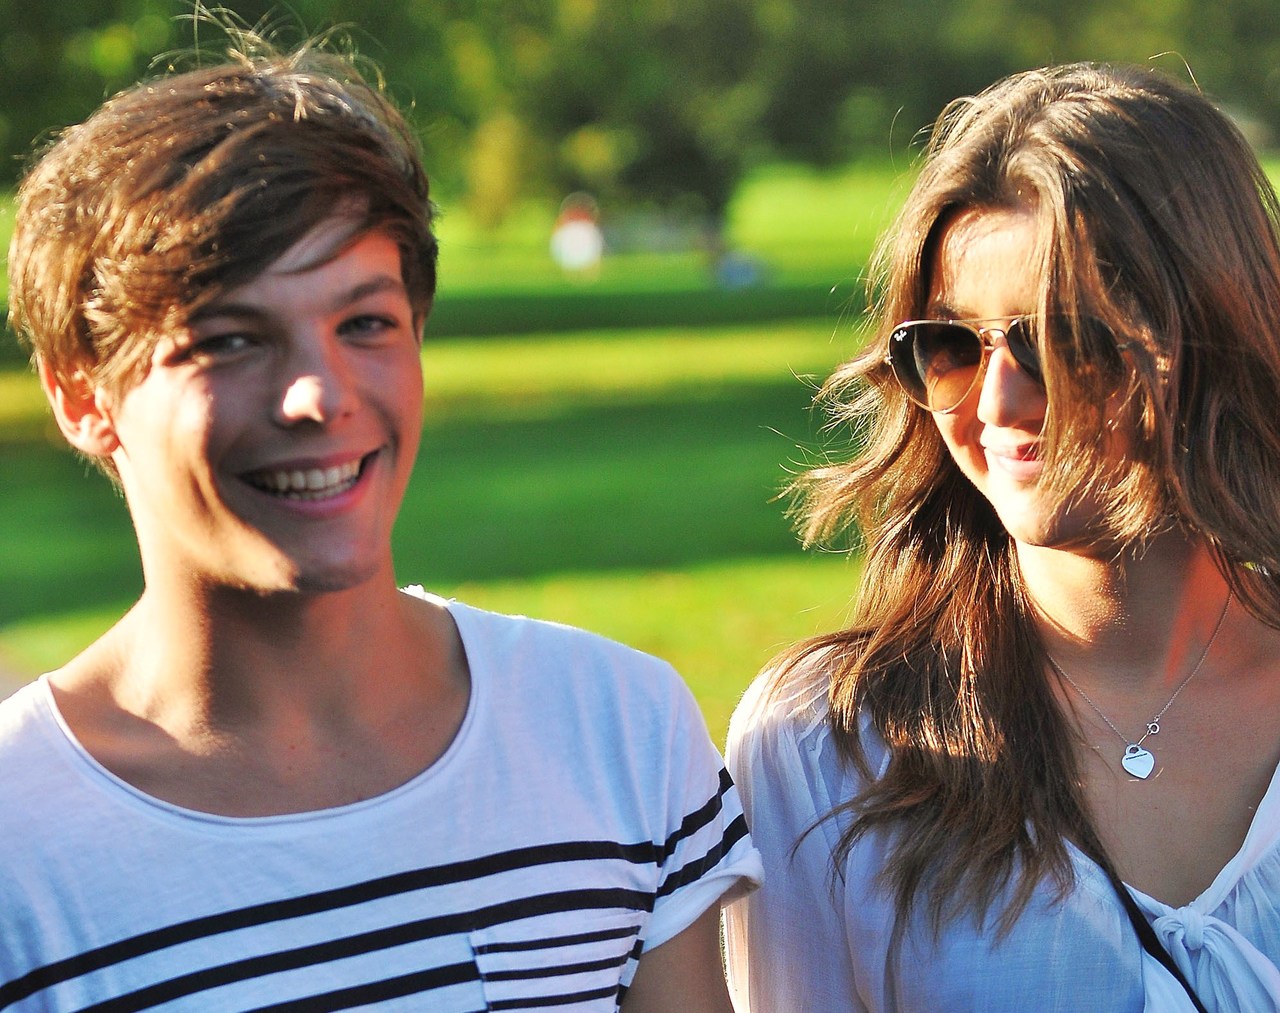 Eleanor Calder And Louis Tomlinson Facts